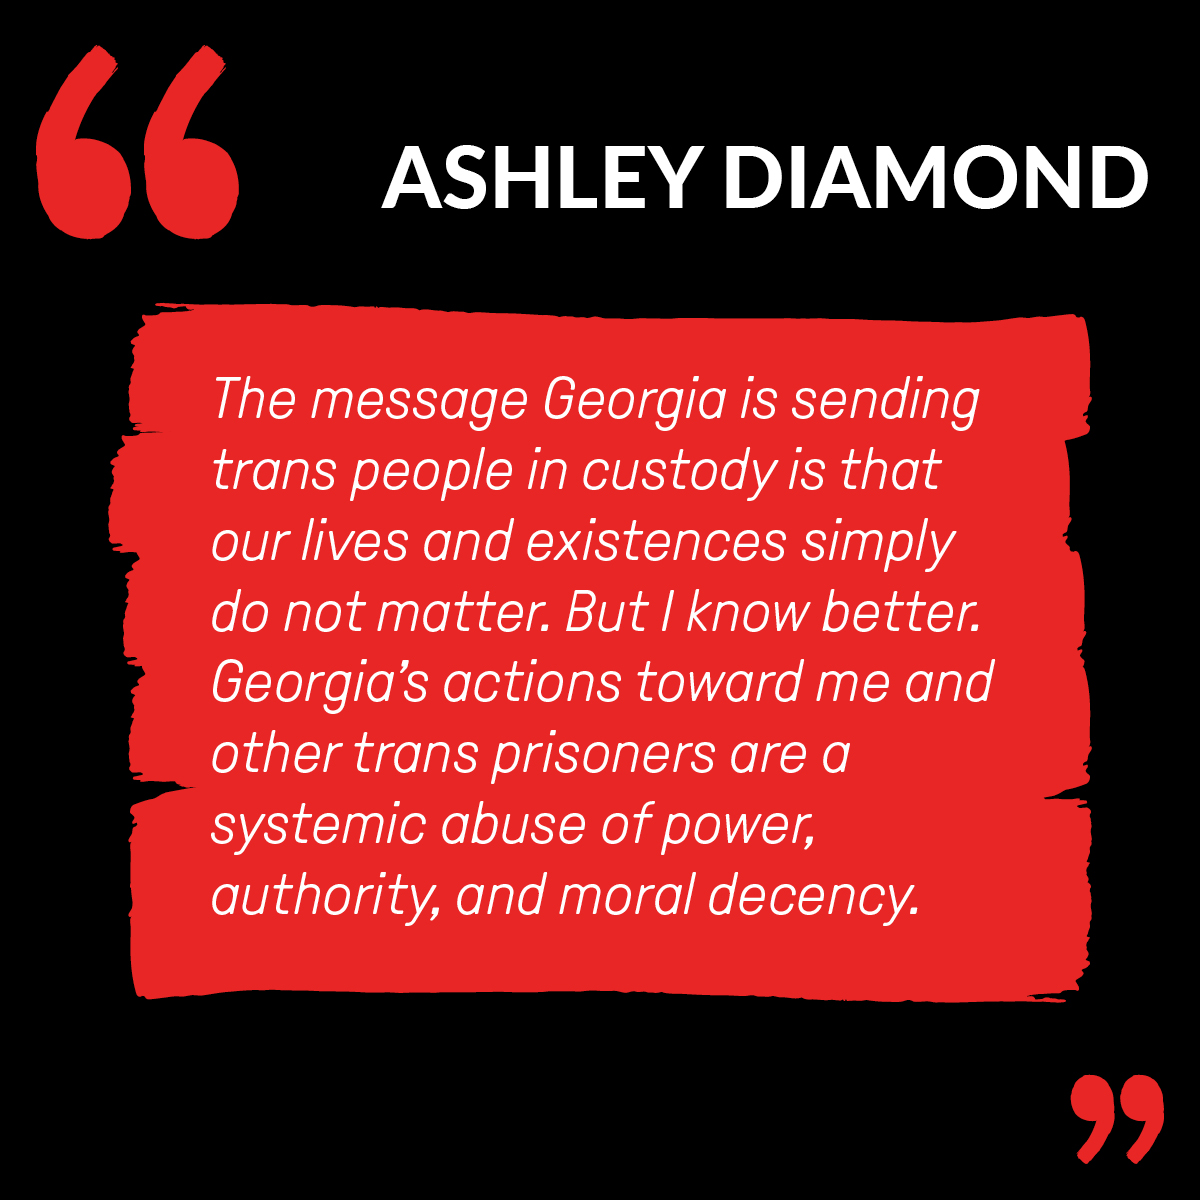 “The message Georgia is sending trans people in custody is that our lives and existences simply do not matter,” said Ms. Diamond. “But I know better. Georgia’s actions toward me and other trans prisoners are a systemic abuse of power, authority, and moral decency.”